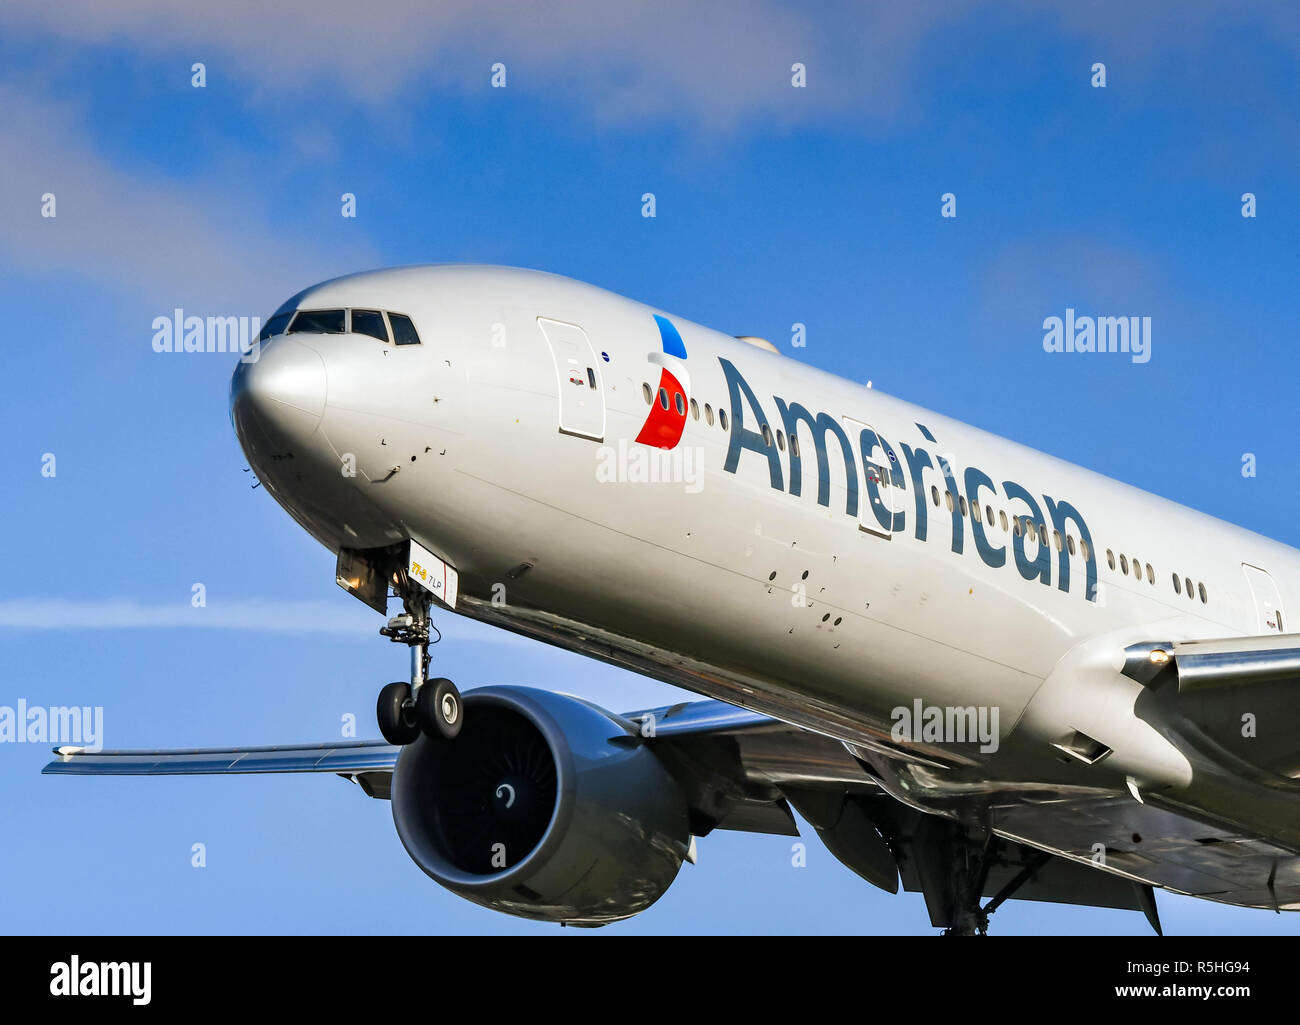 LONDON, ENGLAND - NOVEMBER 2018: American Airlines Boeing 777 long haul airliner landing at London Heathrow Airport. Stock Photo